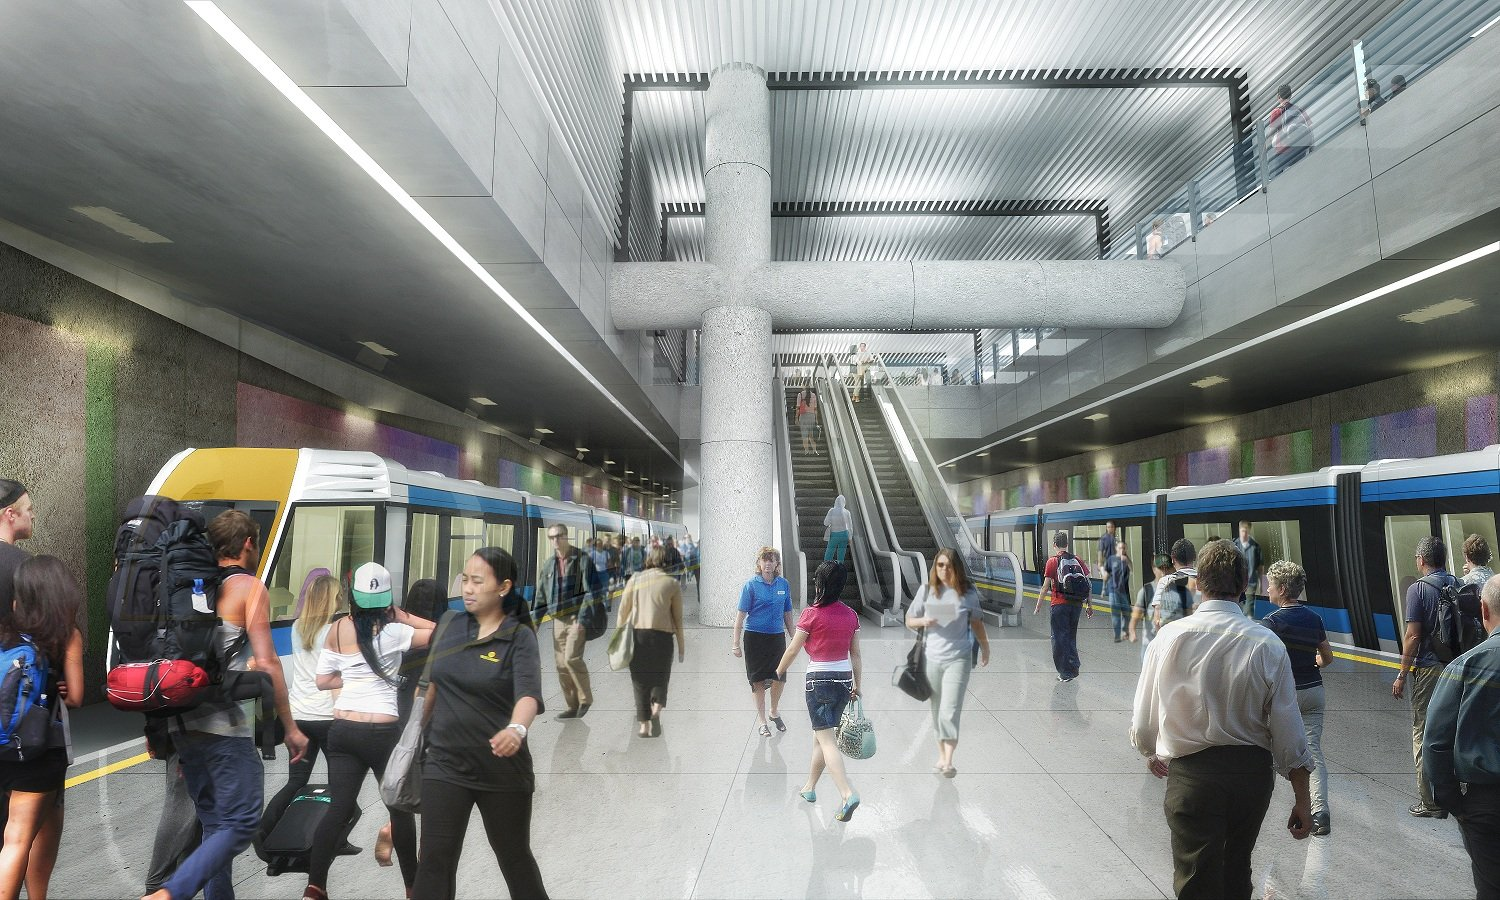 The proposed NZ$2.86 billion Auckland City Rail Link (CRL) is considered to be the most significant improvement to Auckland’s transport network since the opening of the Auckland Harbour Bridge.